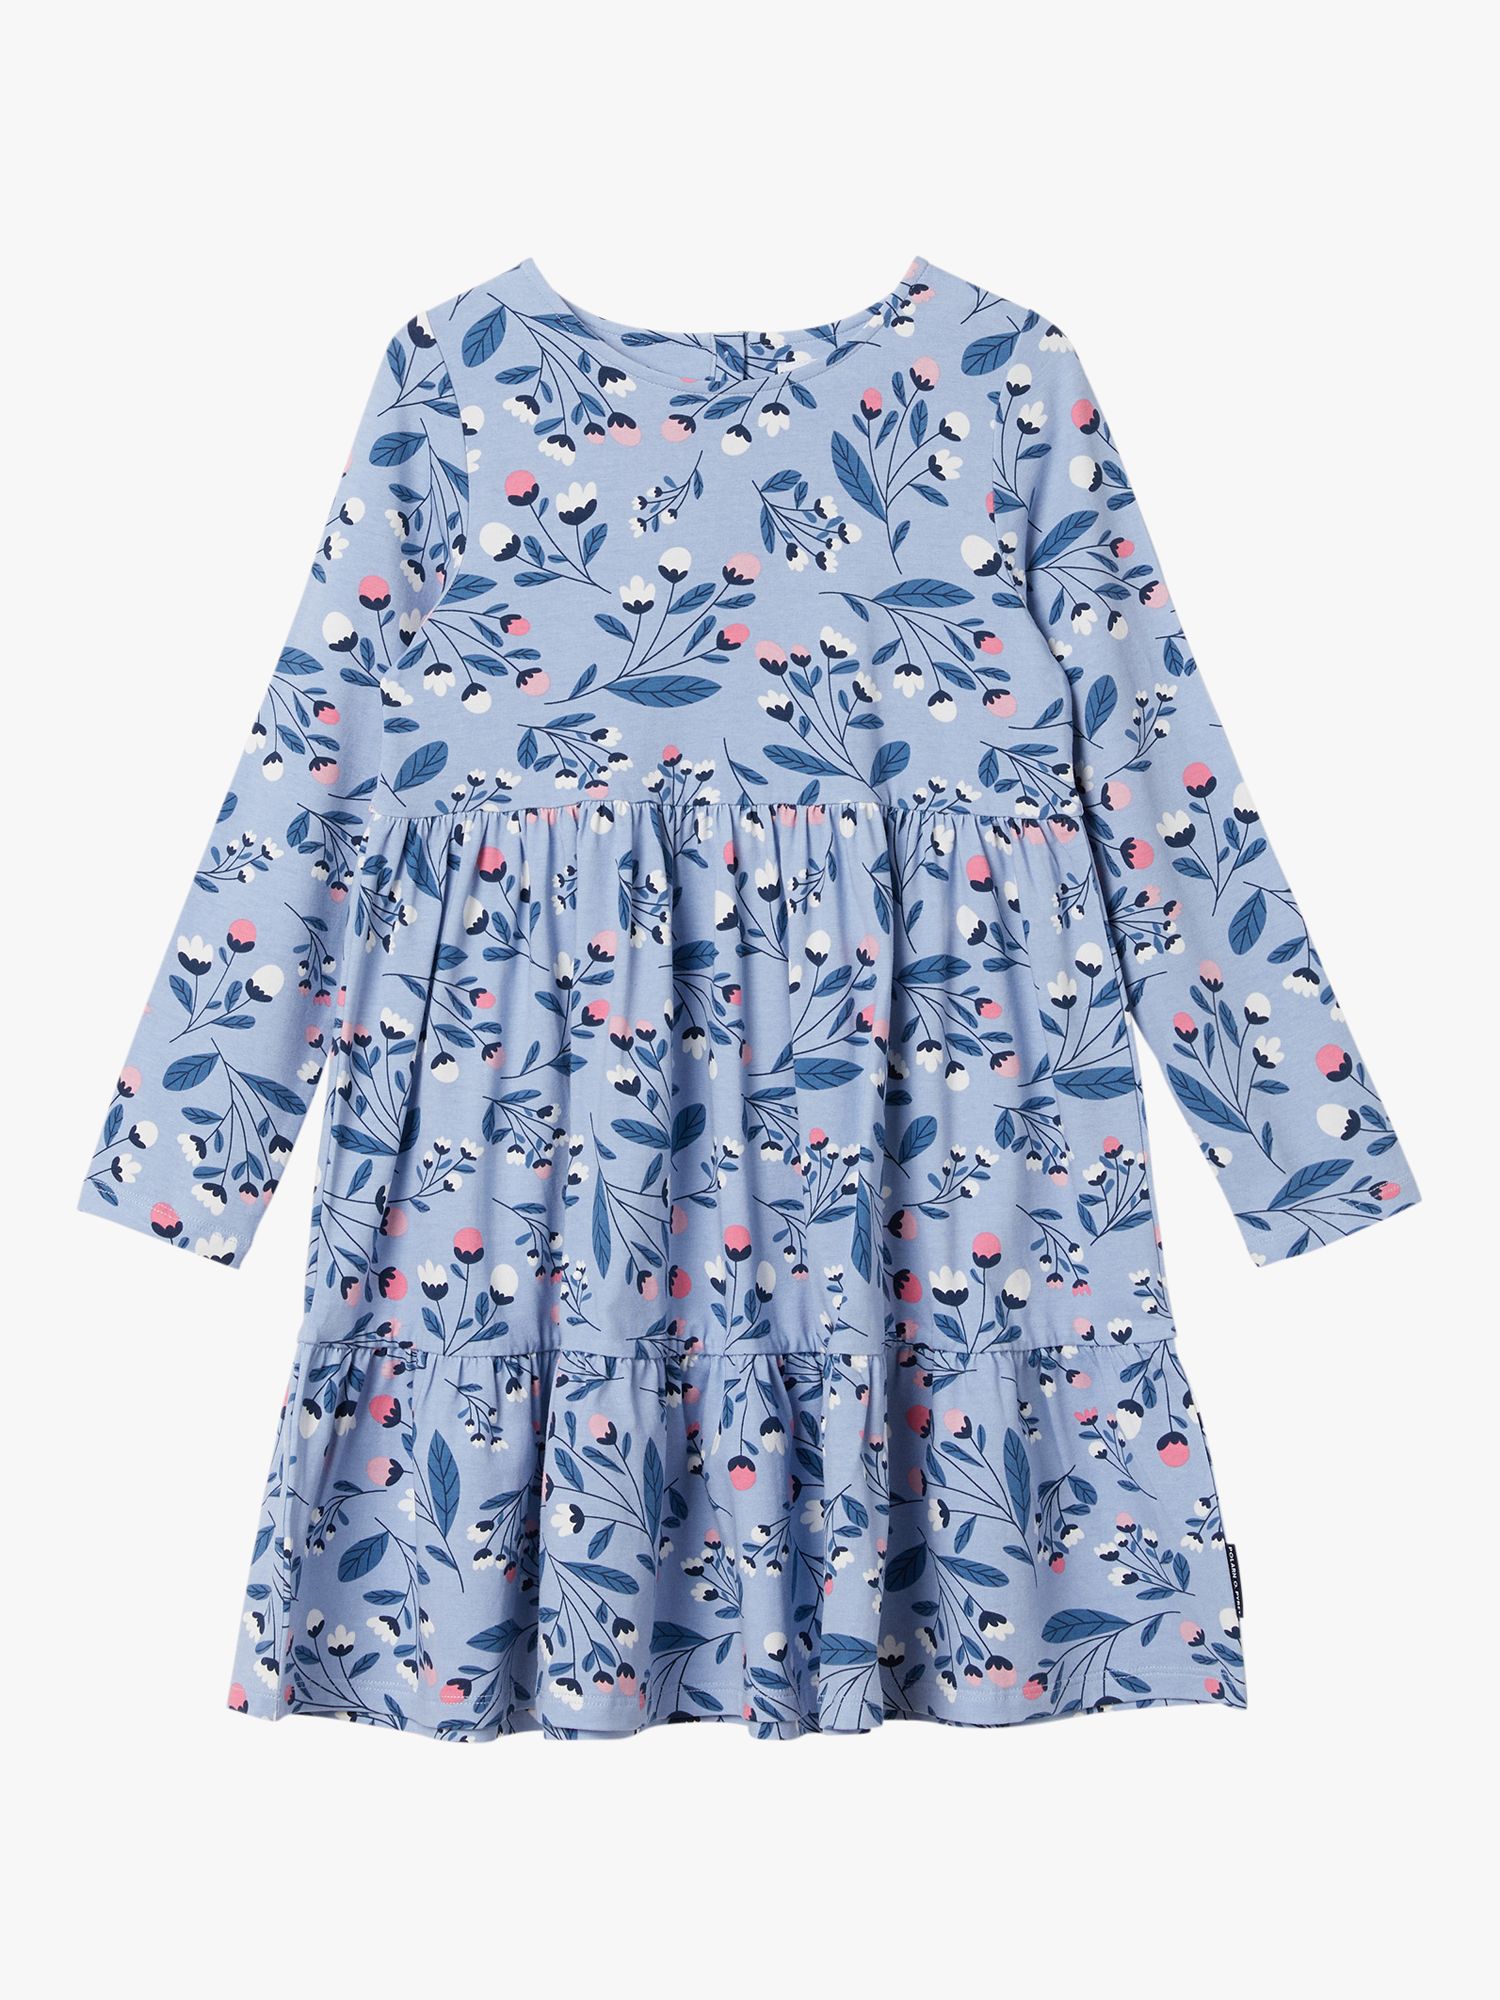 Polarn O. Pyret Kids' Organic Cotton Floral Print Tiered Dress, Blue, 8-9 years